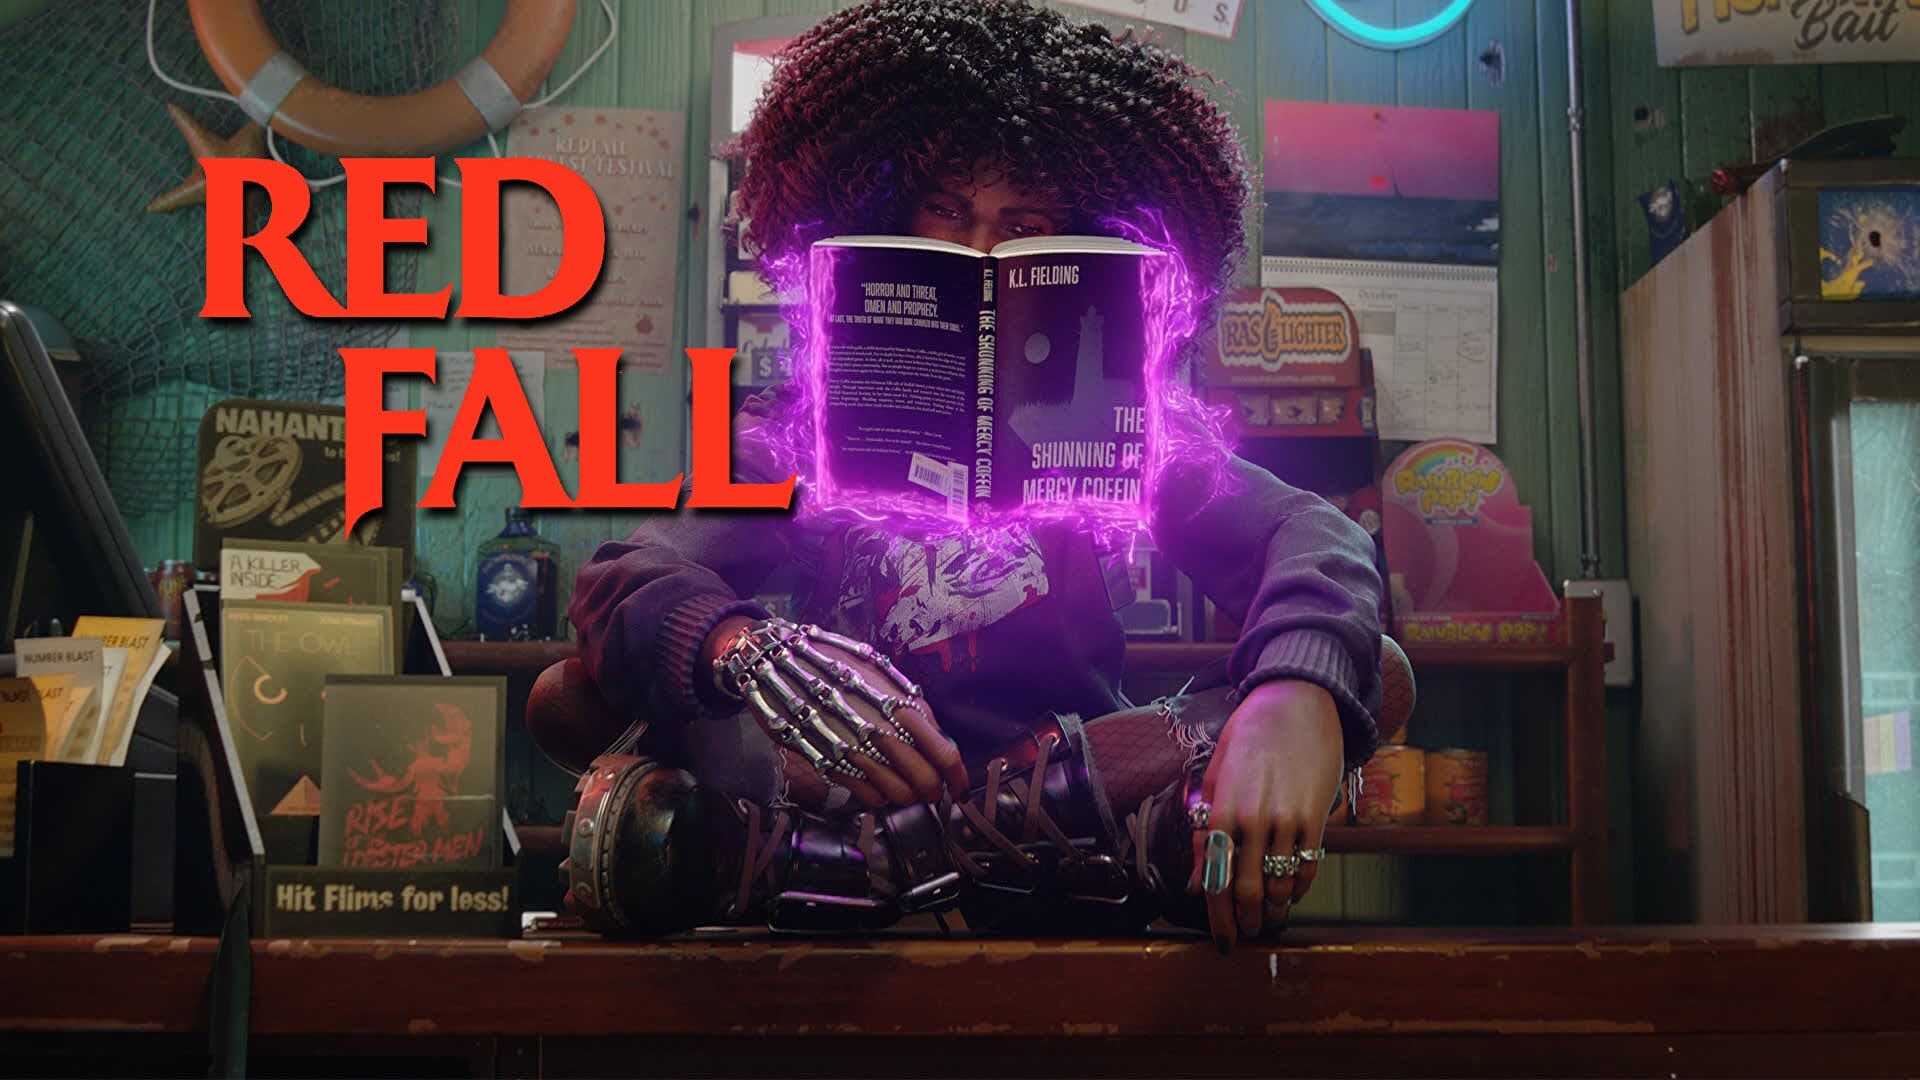 New trailer for Redfall published: The world of the game is introduced